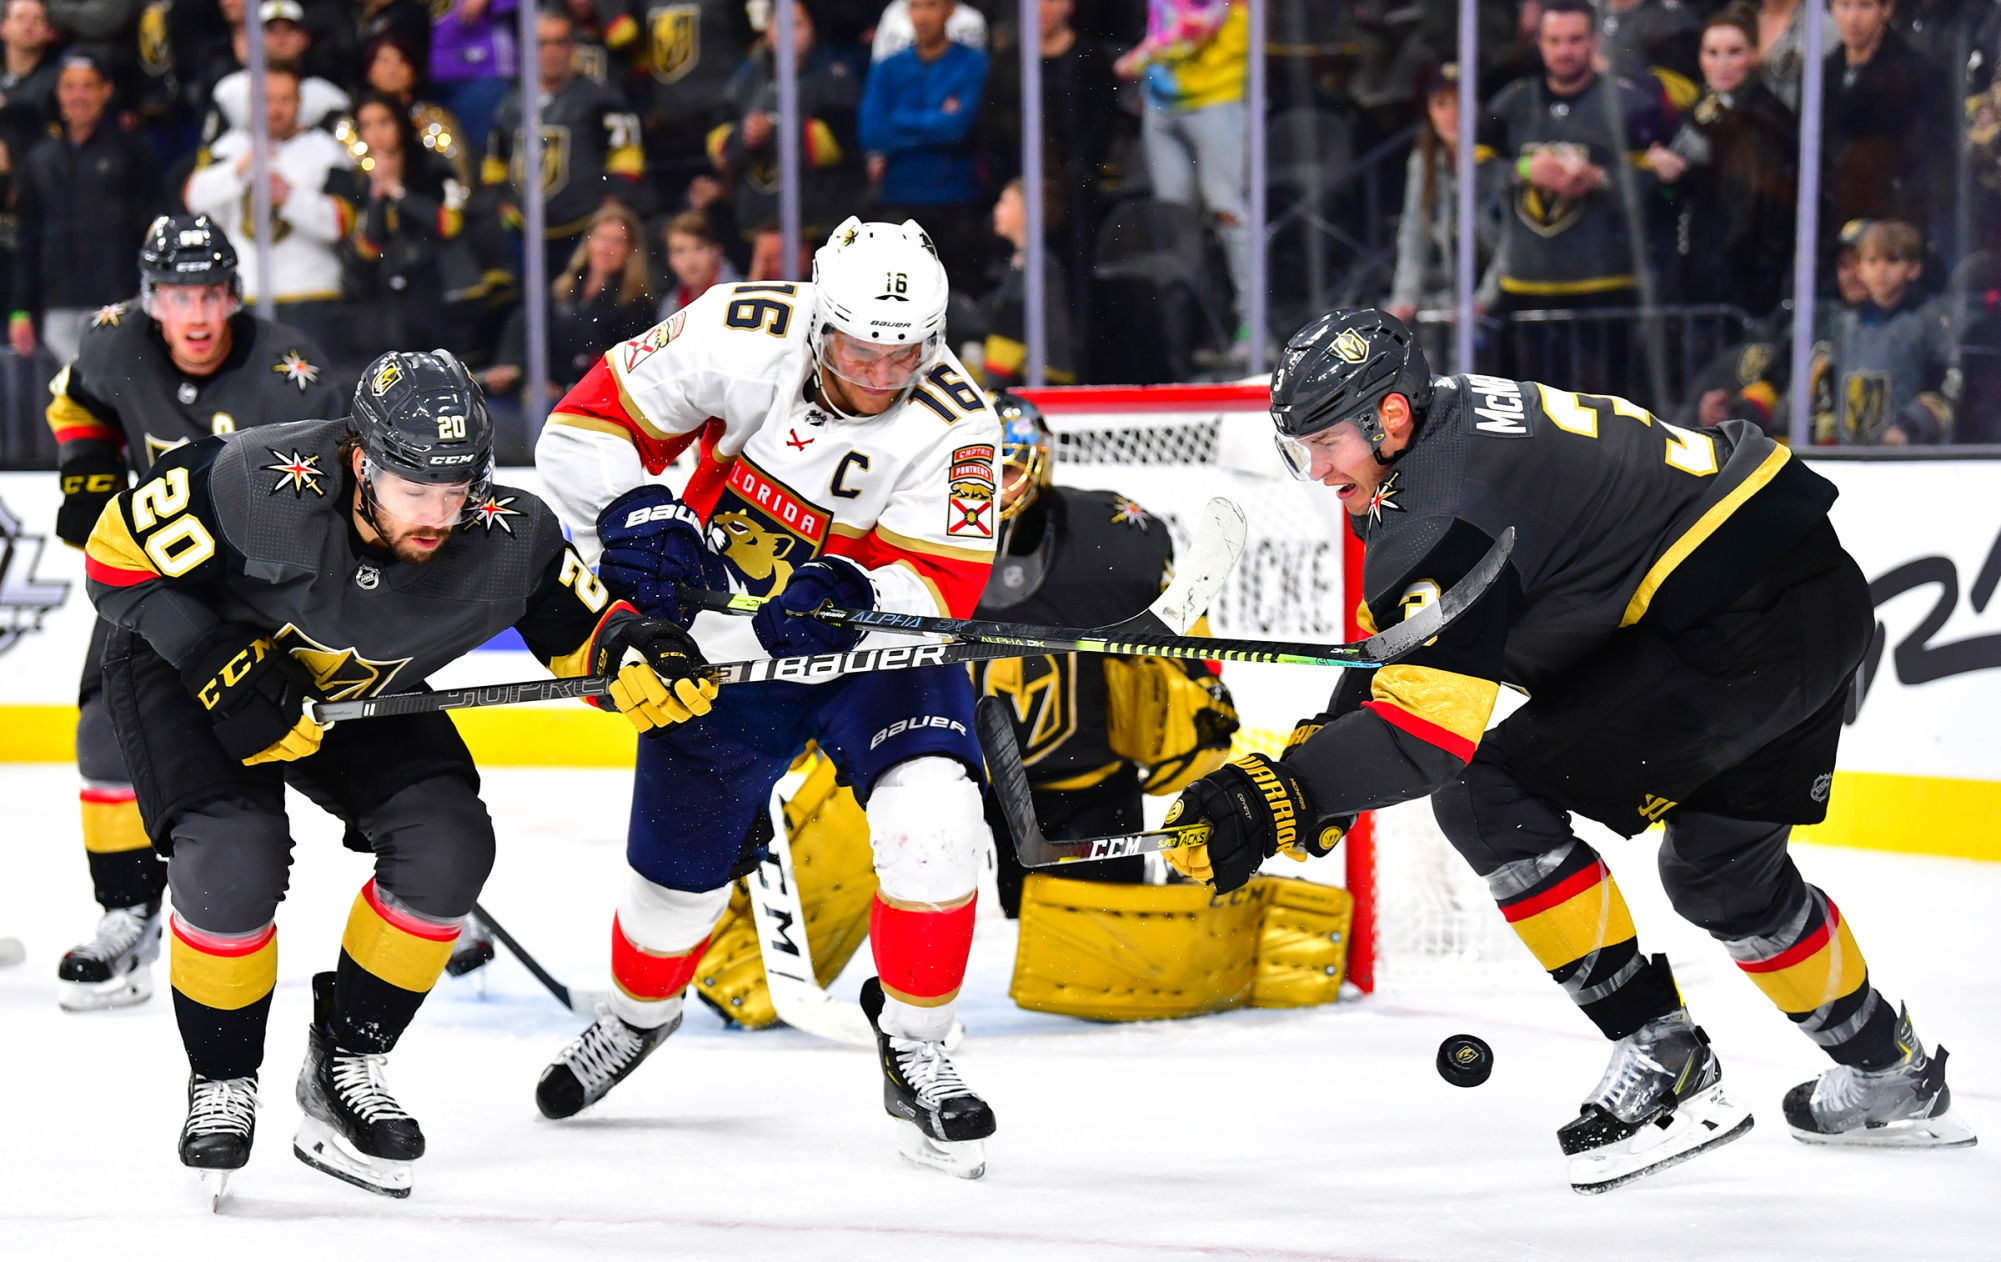 Feb 22, 2020; Las Vegas, Nevada, USA; Vegas Golden Knights center Chandler Stephenson (20) lifts the stick of Florida Panthers center Aleksander Barkov (16) as Vegas defenseman Brayden McNabb (3) moves to clear the puck during the third period at T-Mobile Arena. Mandatory Credit: Stephen R. Sylvanie-USA TODAY Sports 

Photo by Icon Sport